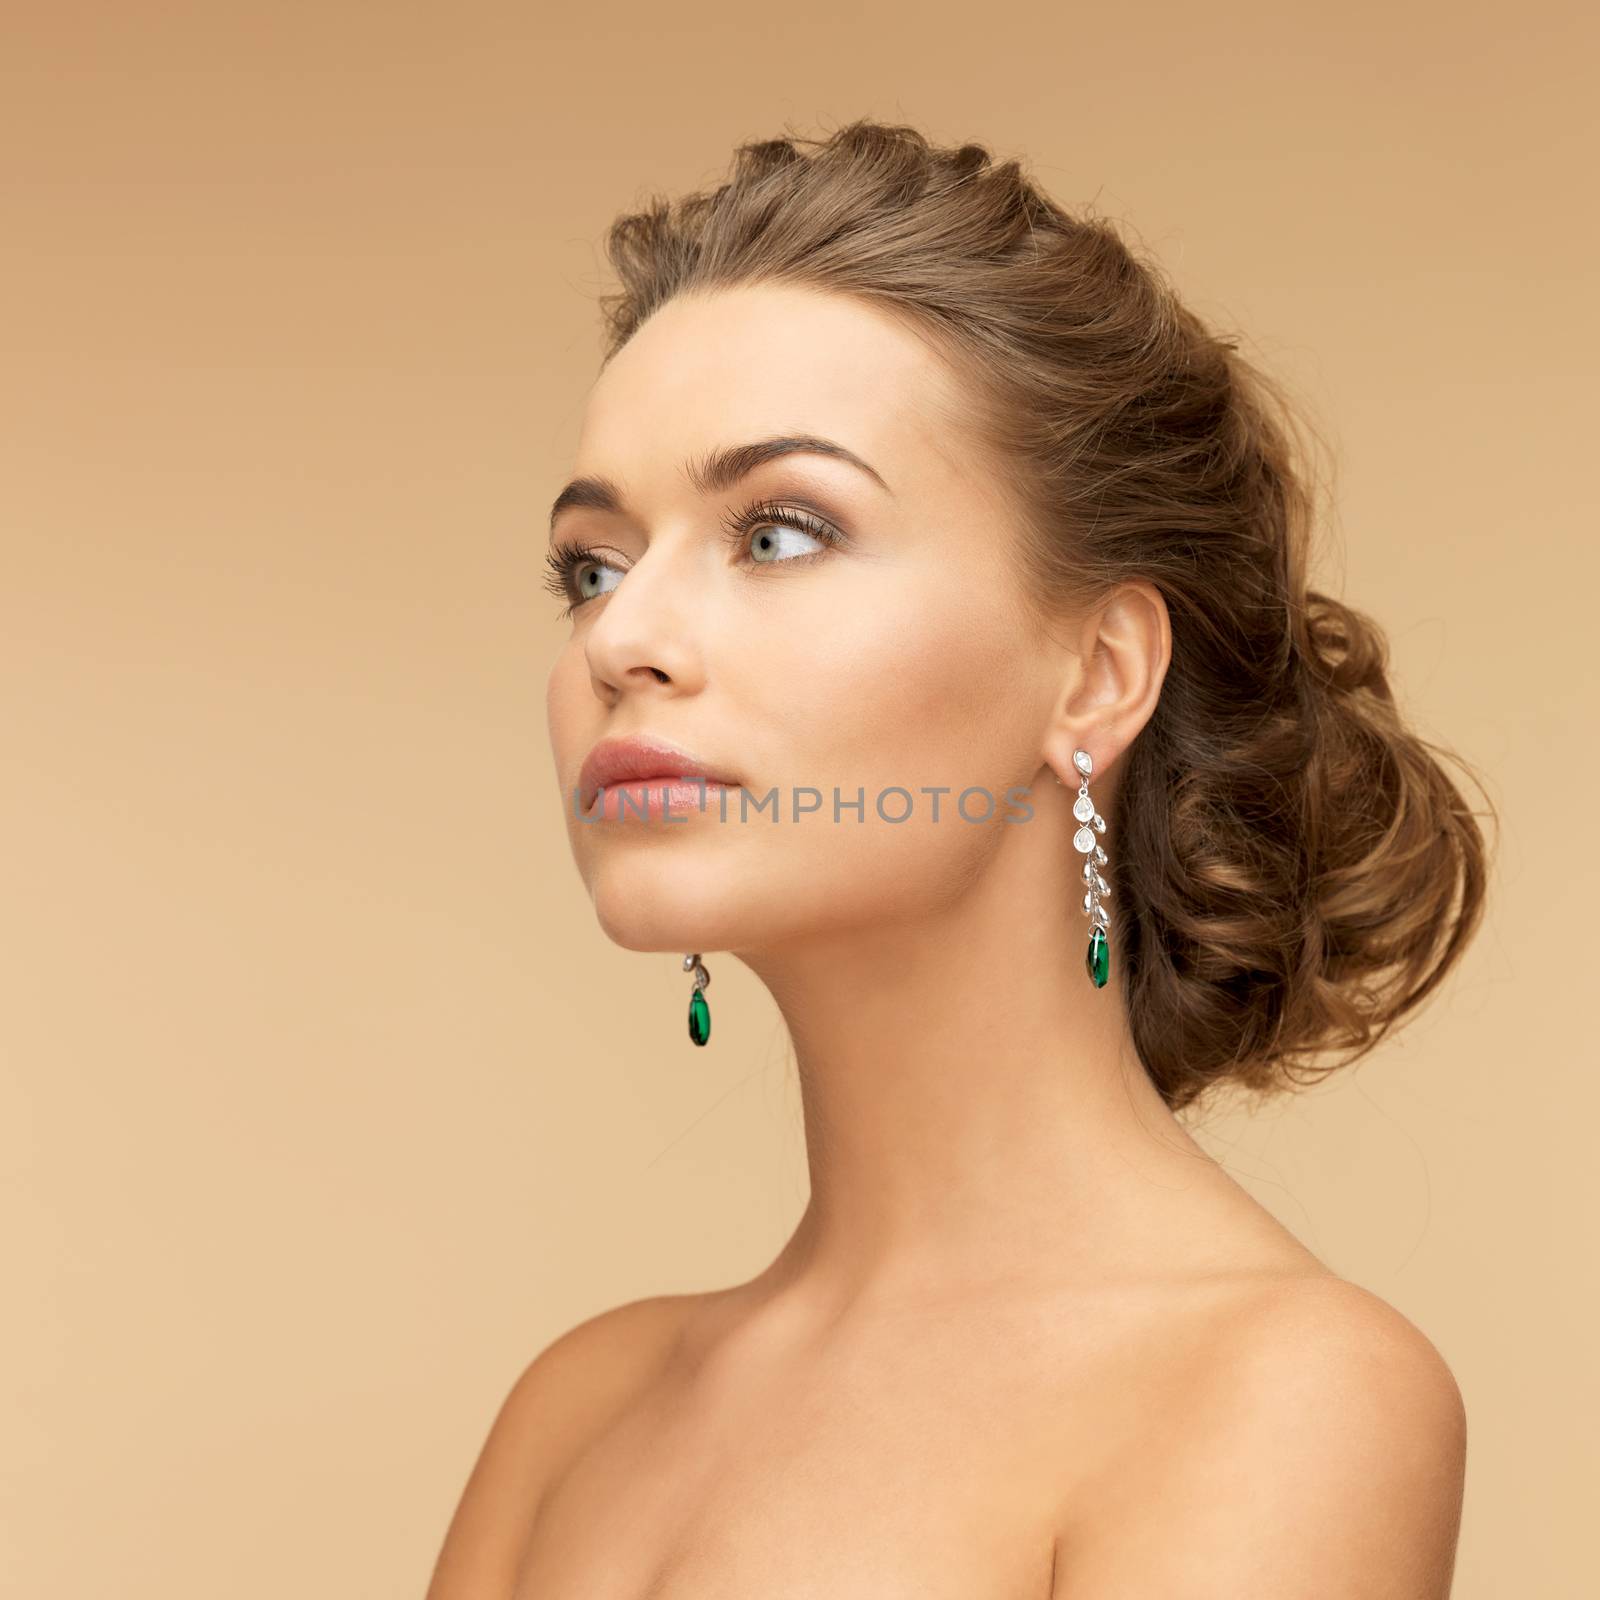 woman with diamond and emerald earrings by dolgachov